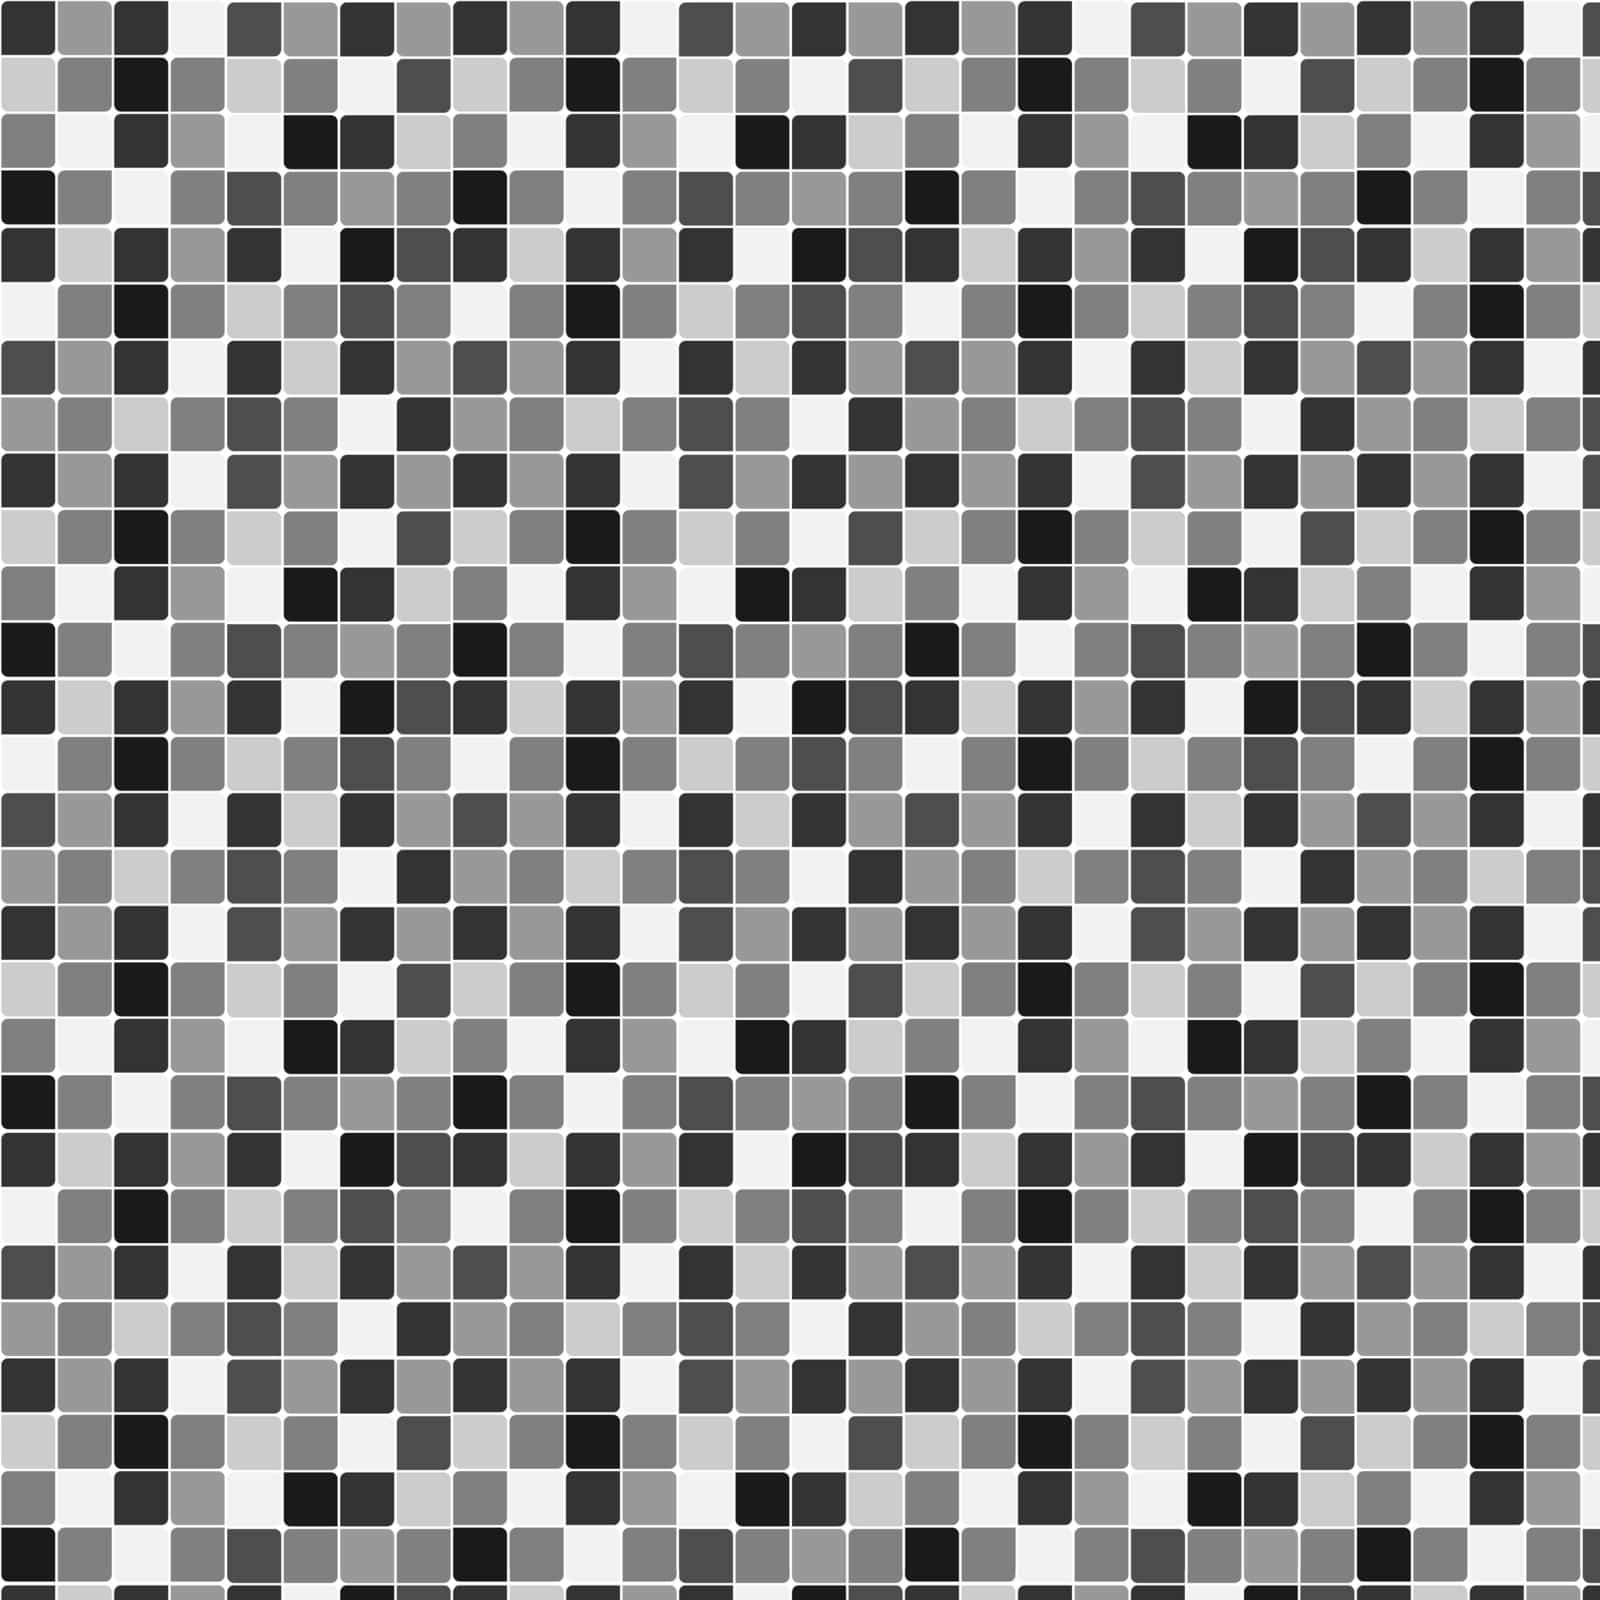  Make sure your grout doesn_t interrupt the pattern